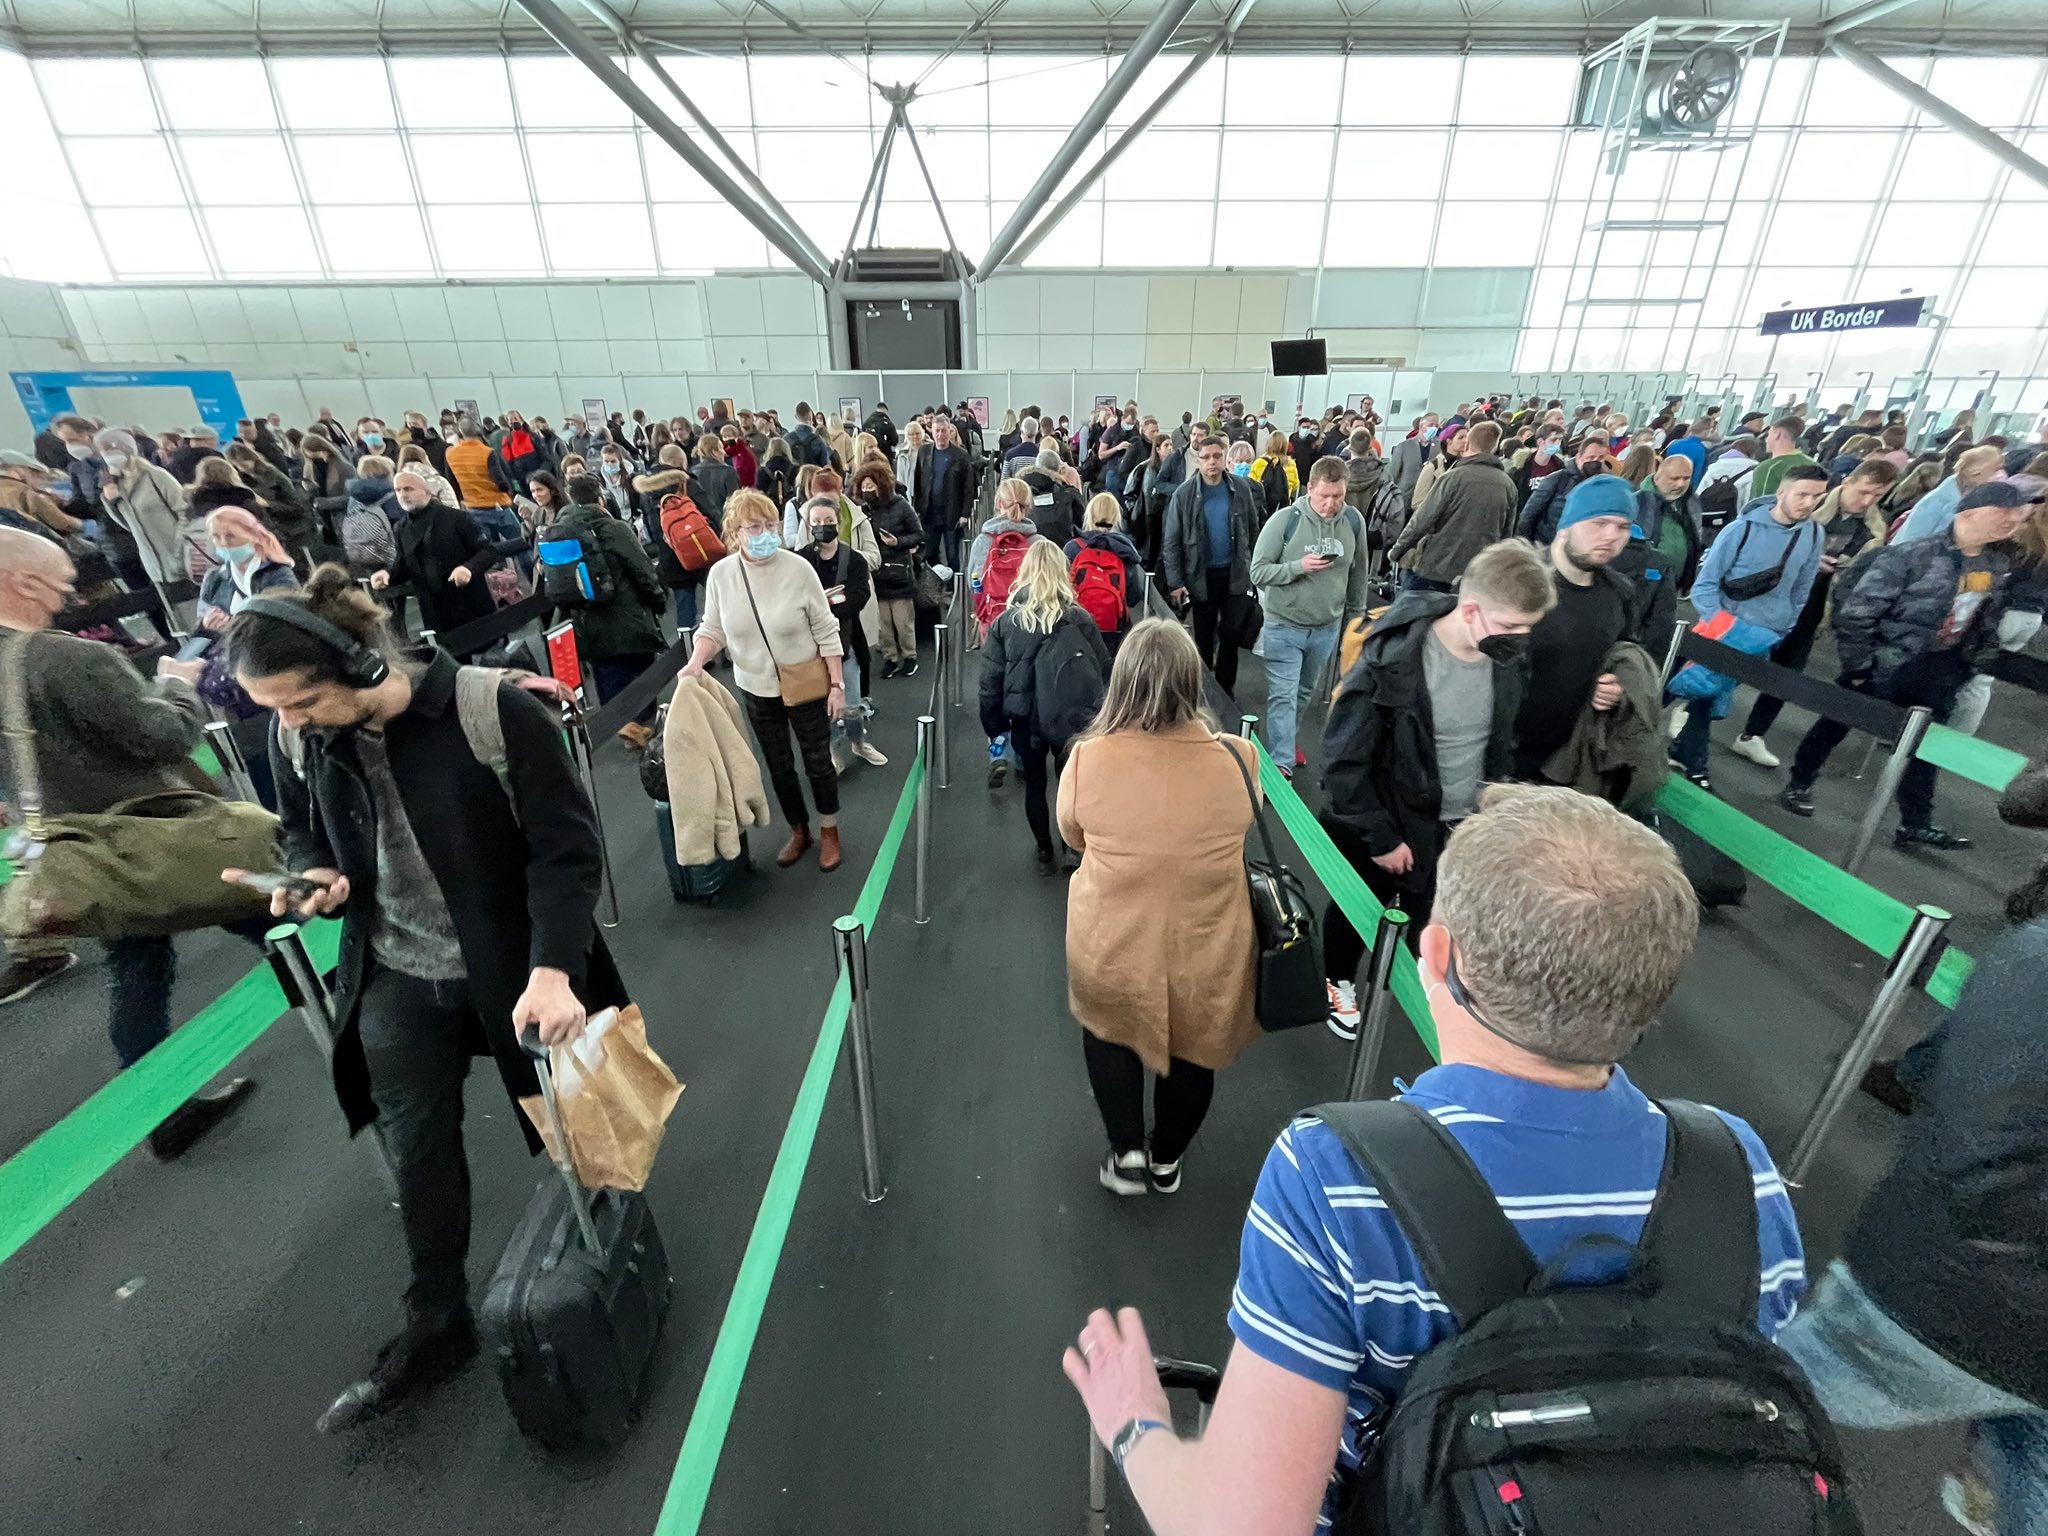 Welcome sight? Arrivals queuing for passport control at London Stansted airport